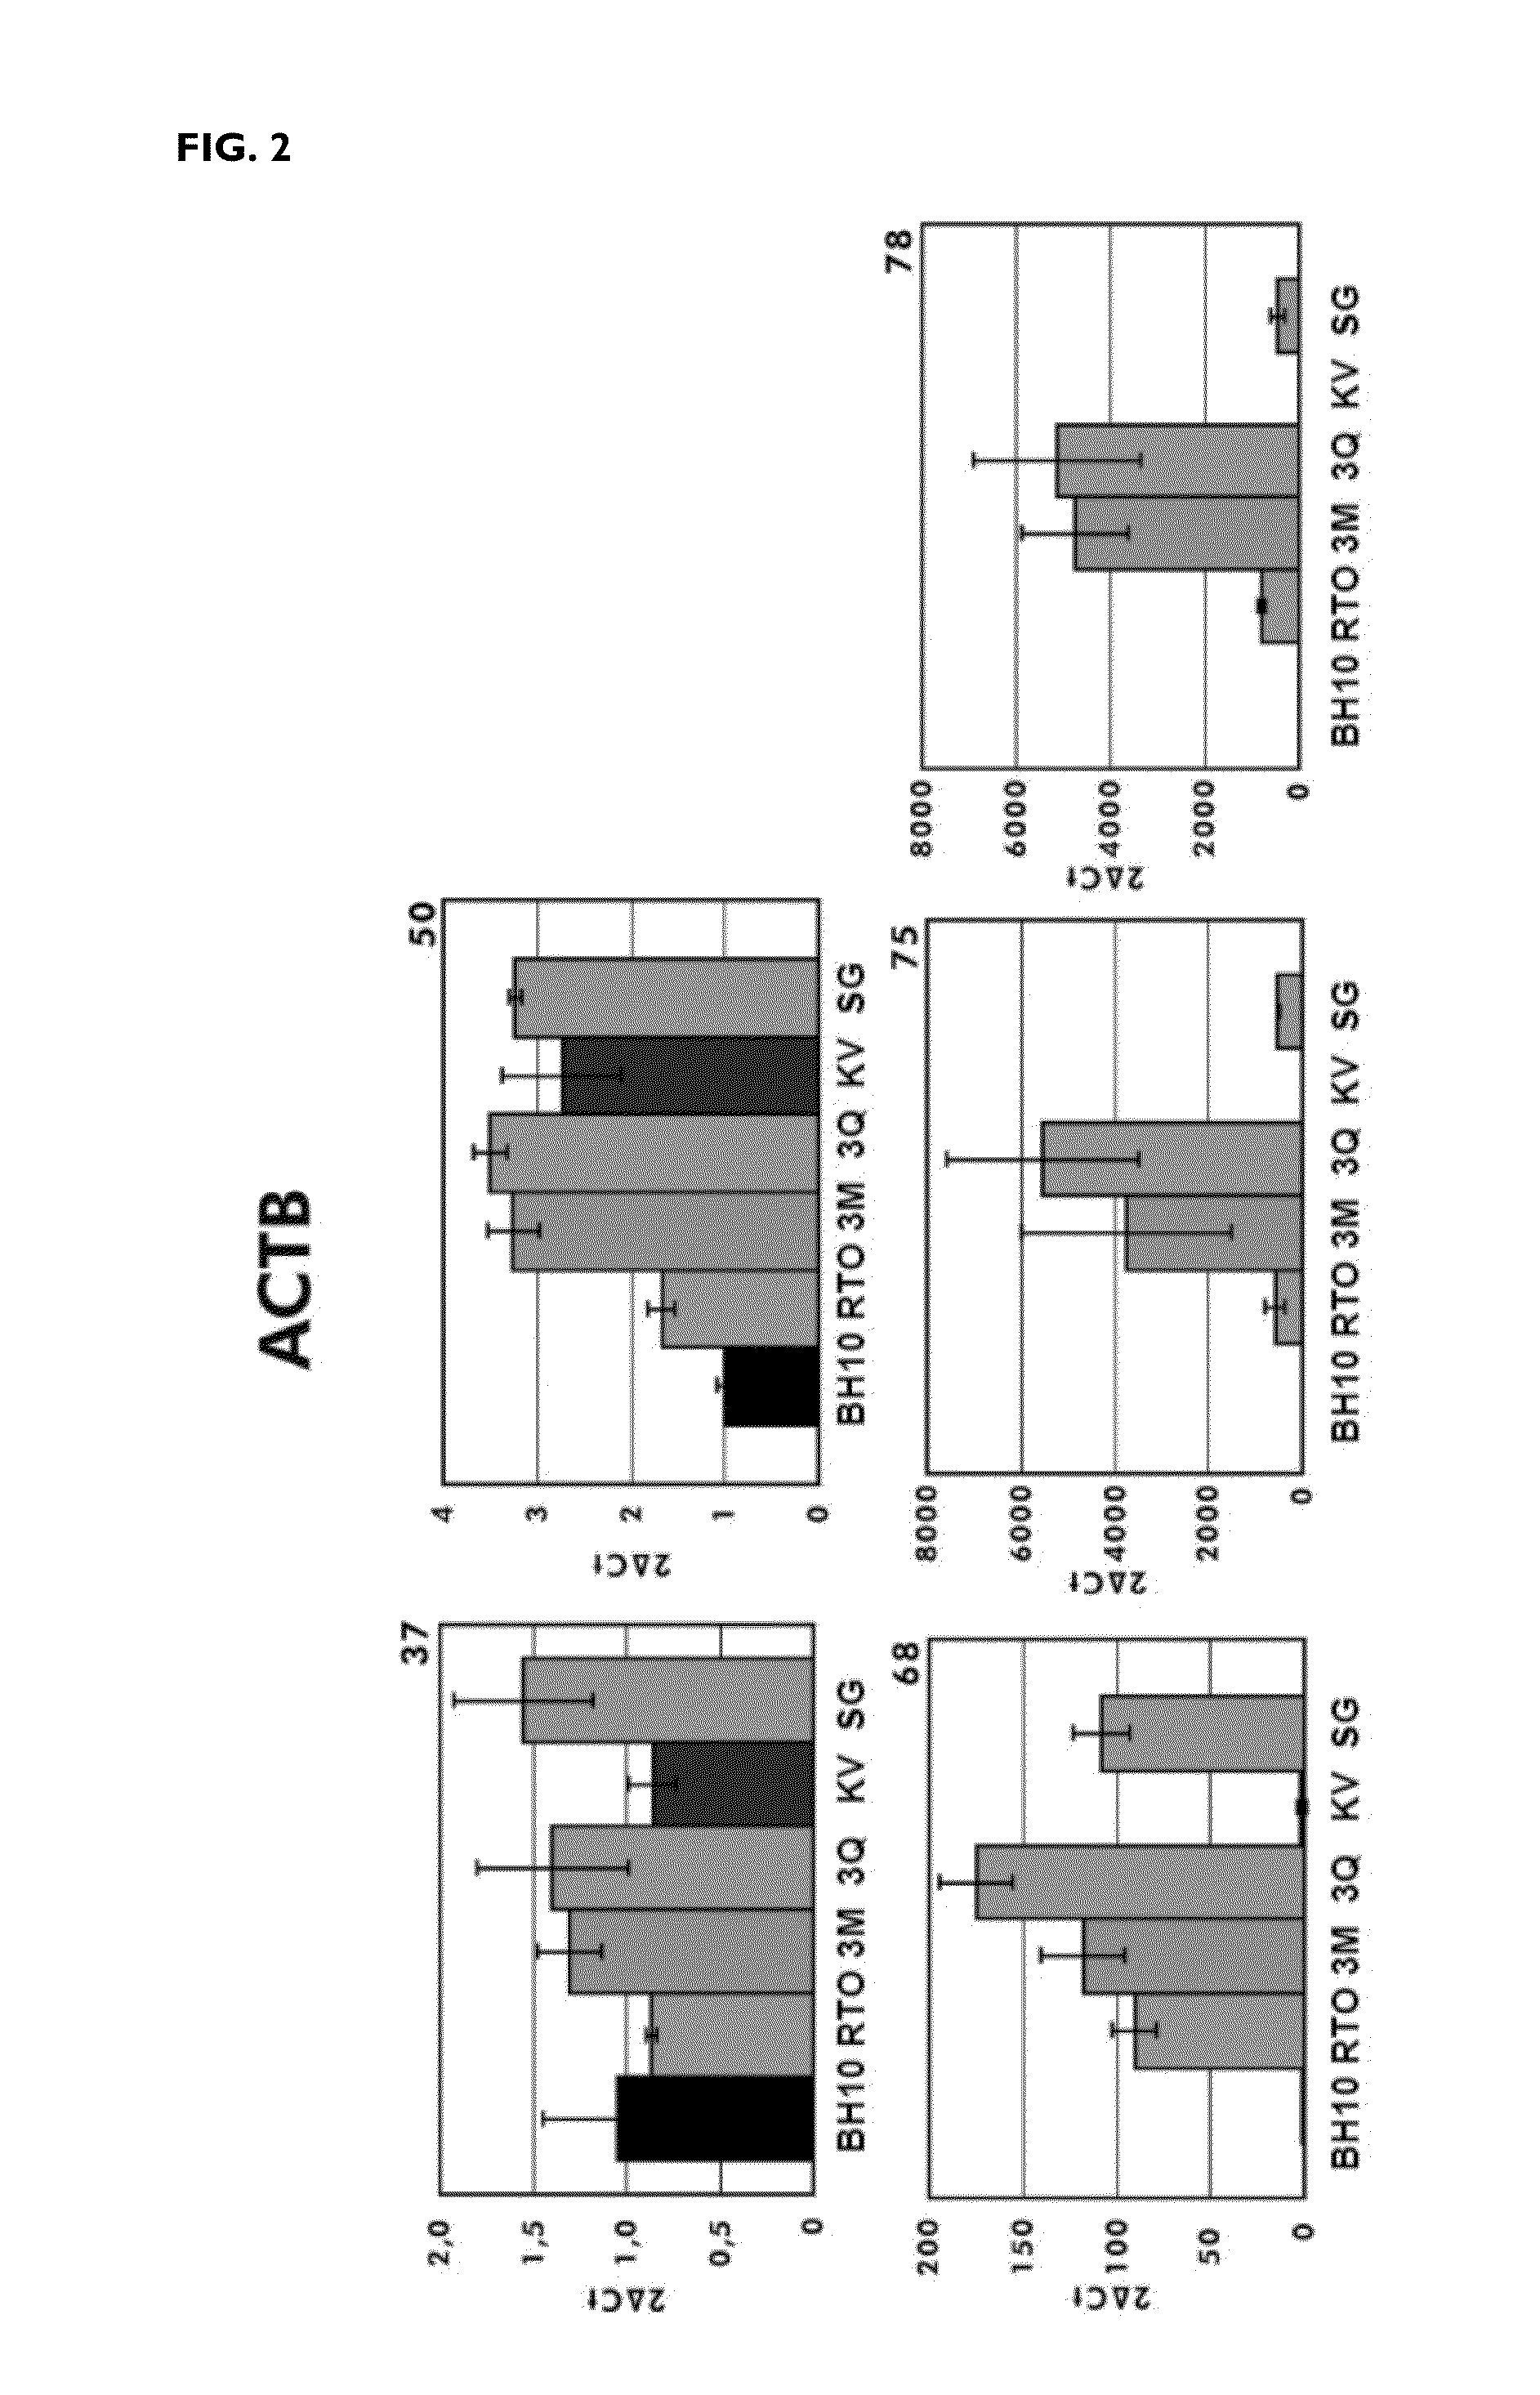 HIV type 1 group o reverse transcriptases that are active at high temperatures